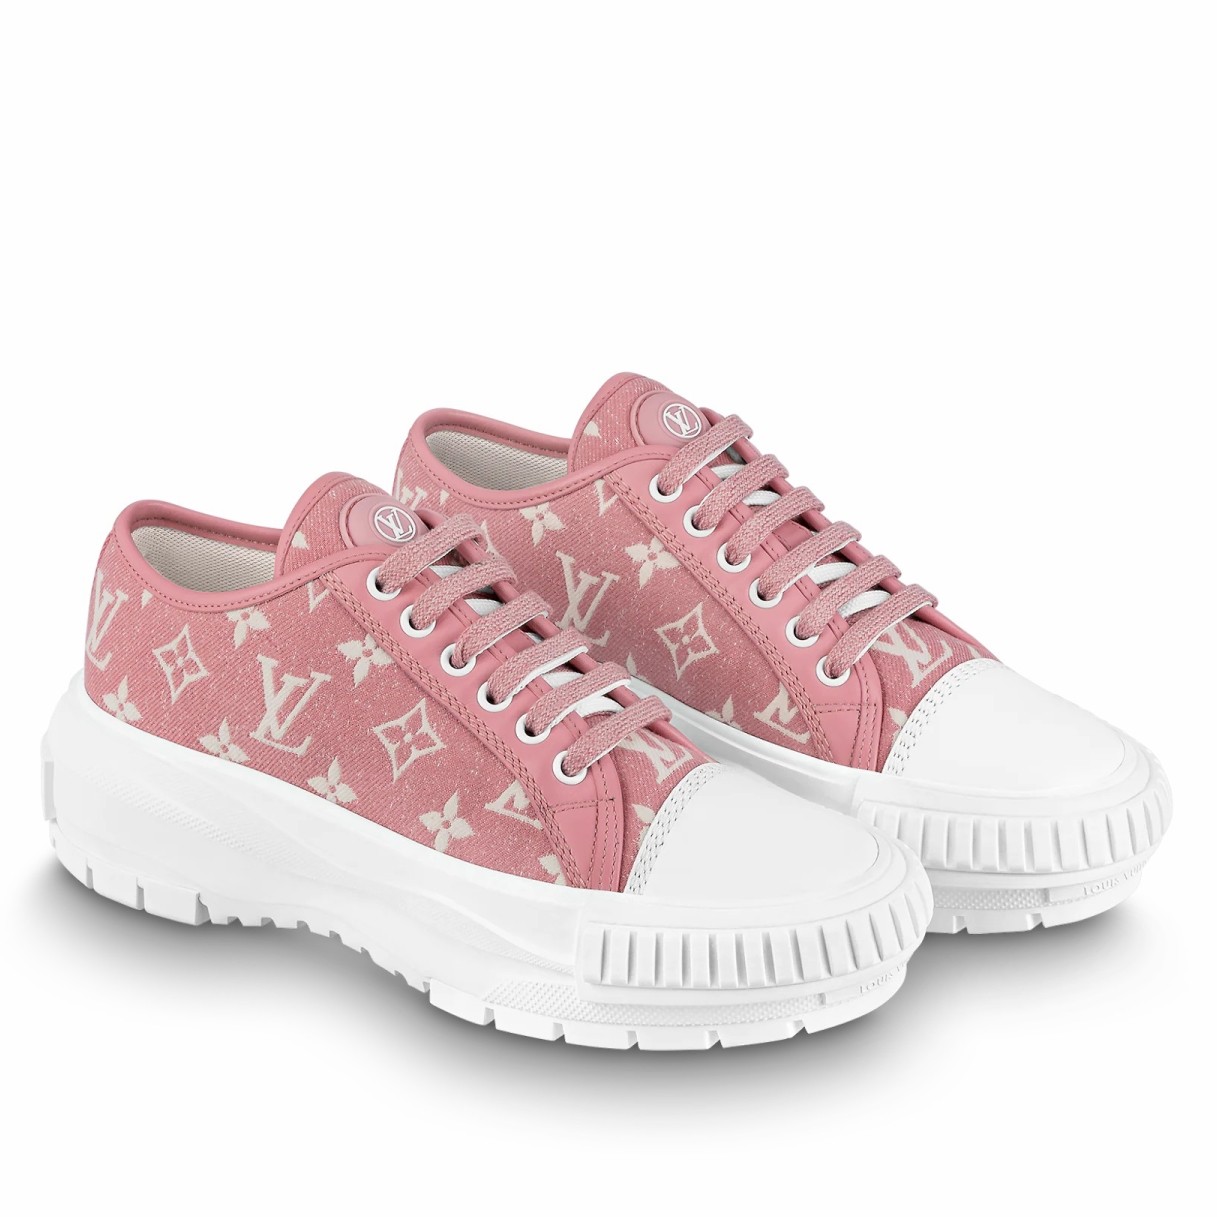 Louis Vuitton LV Monogram Chunky Sneakers - Pink Sneakers, Shoes